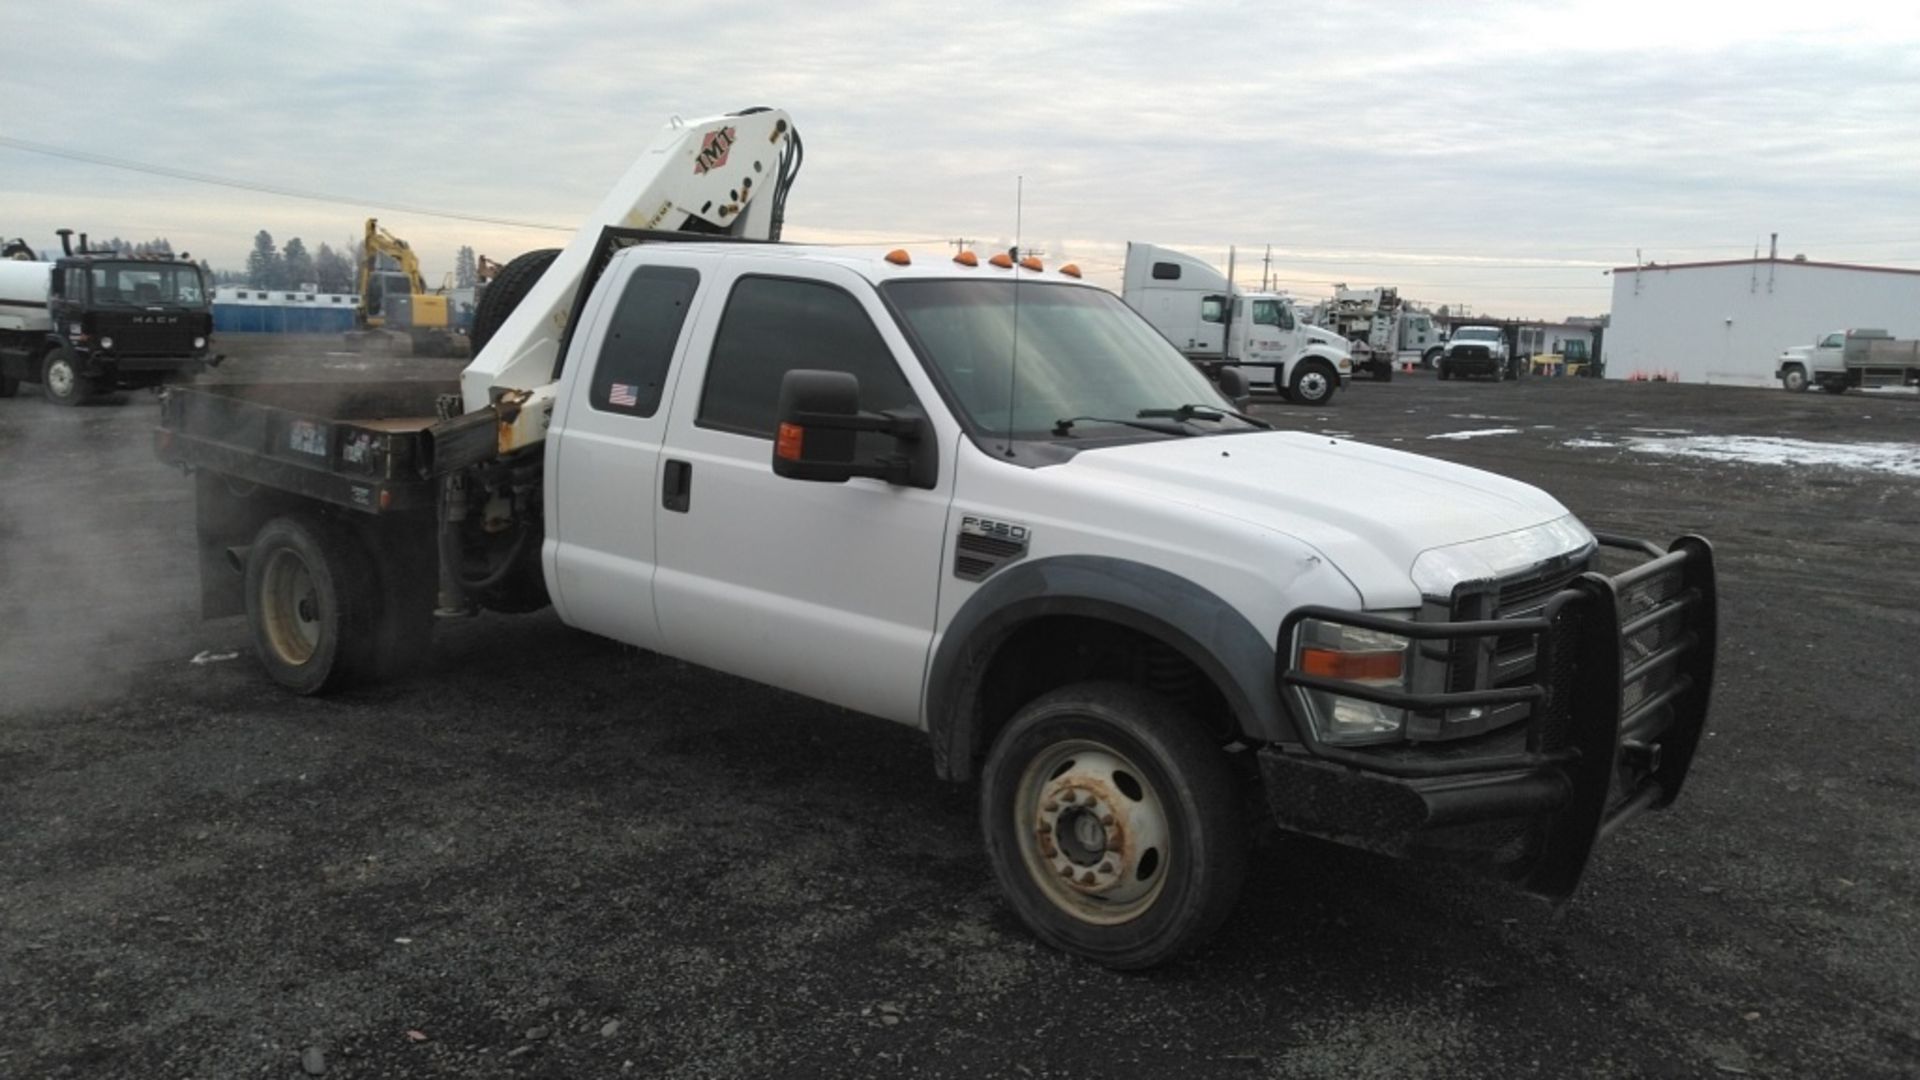 2008 Ford F550 4x4 Extra Cab Flatbed Truck - Image 4 of 30